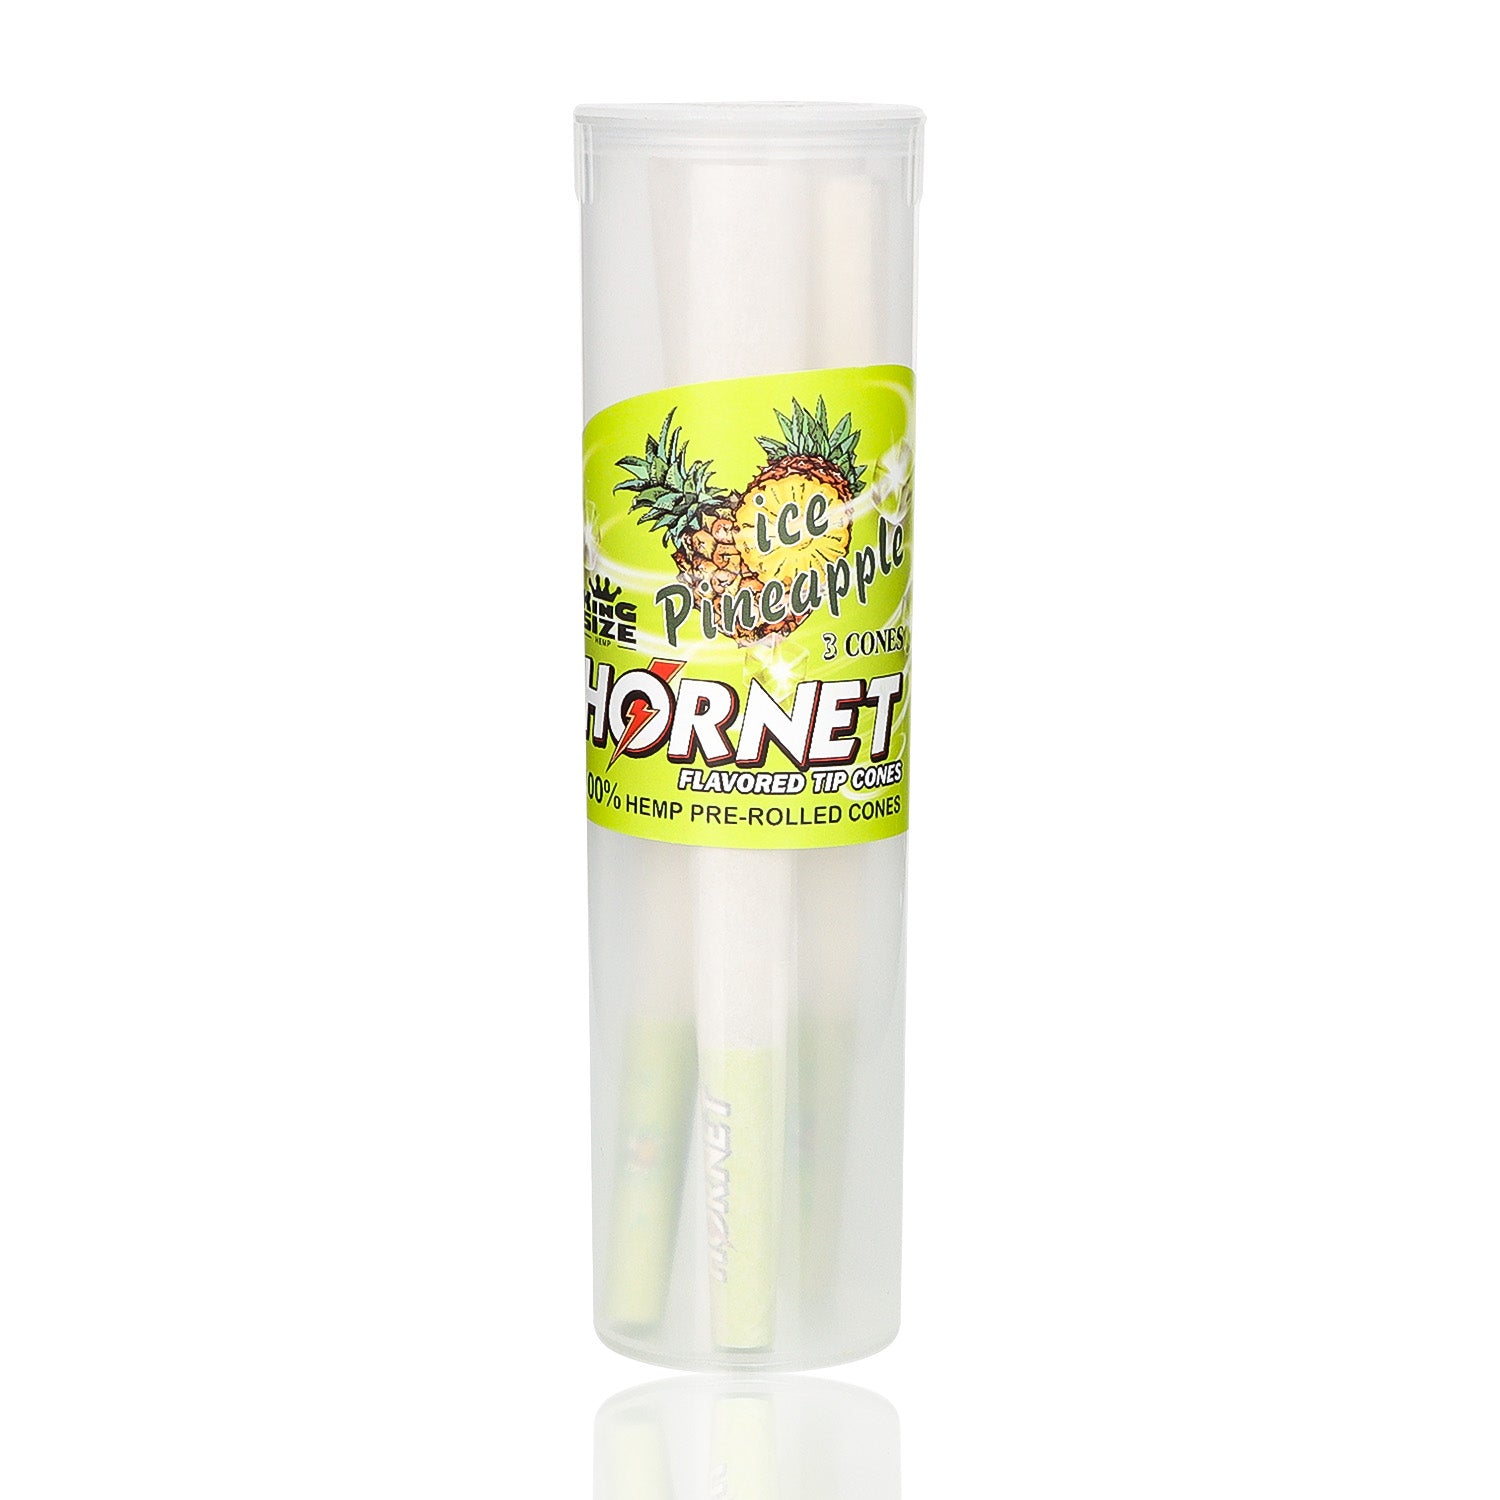 HORNET Pineapple Flavors Pre Rolled Cones, King Size Pre Rolled Rolling Paper With Tips, Slow Burning Rolling Cones & Flavored Pop, 3 PCS / Tube, 12 Tubes / Box